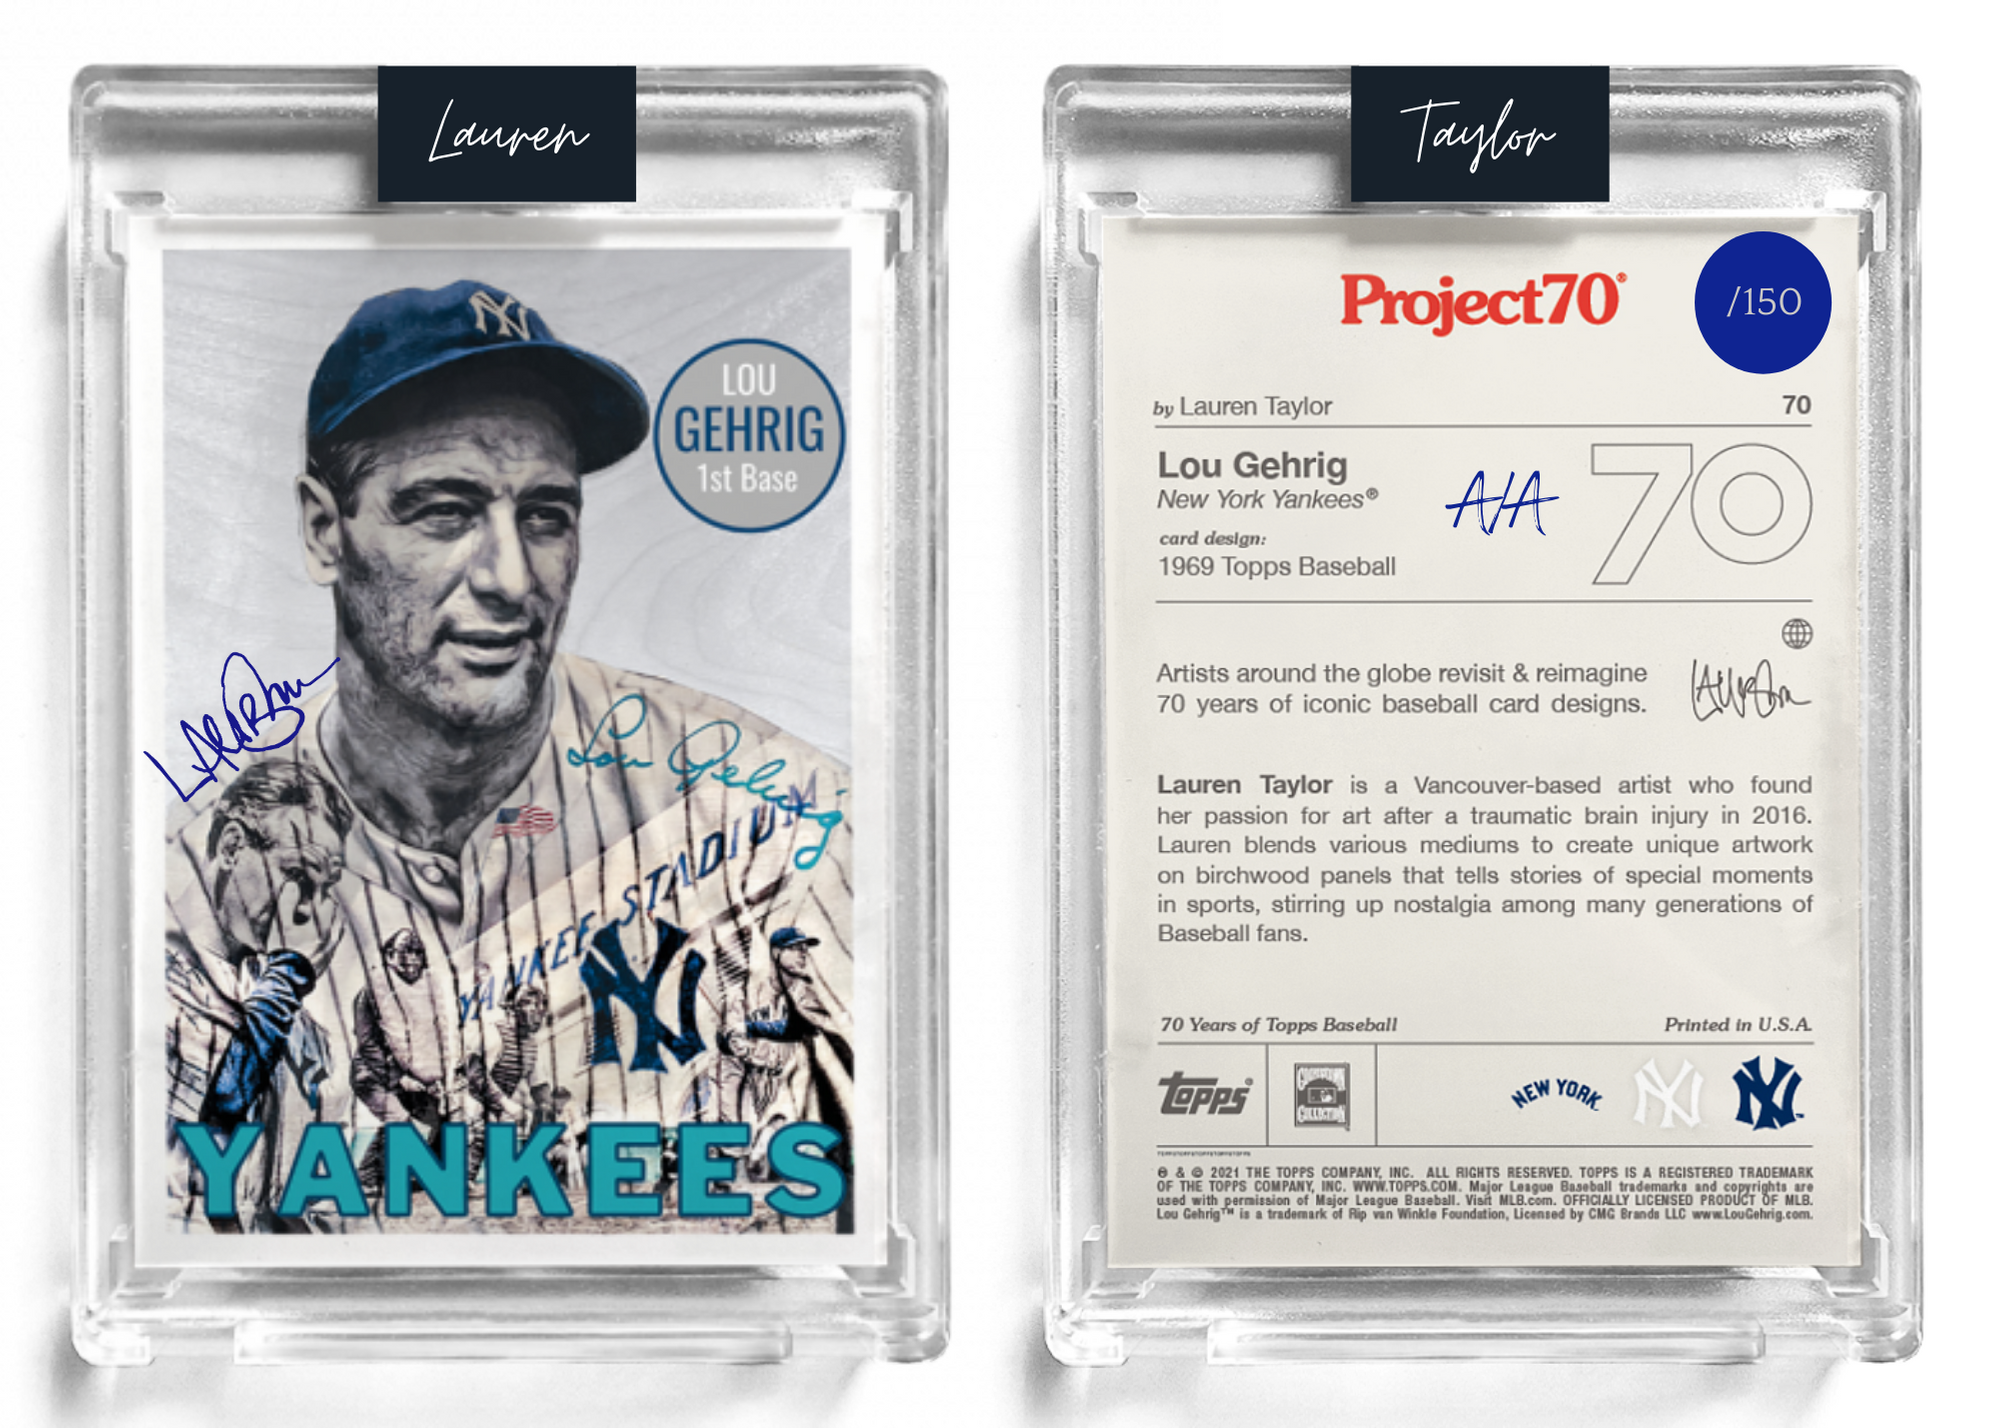 /150 Navy Blue Artist Signature - Topps Project 70 130pt card #70 by Lauren Taylor - Lou Gehrig